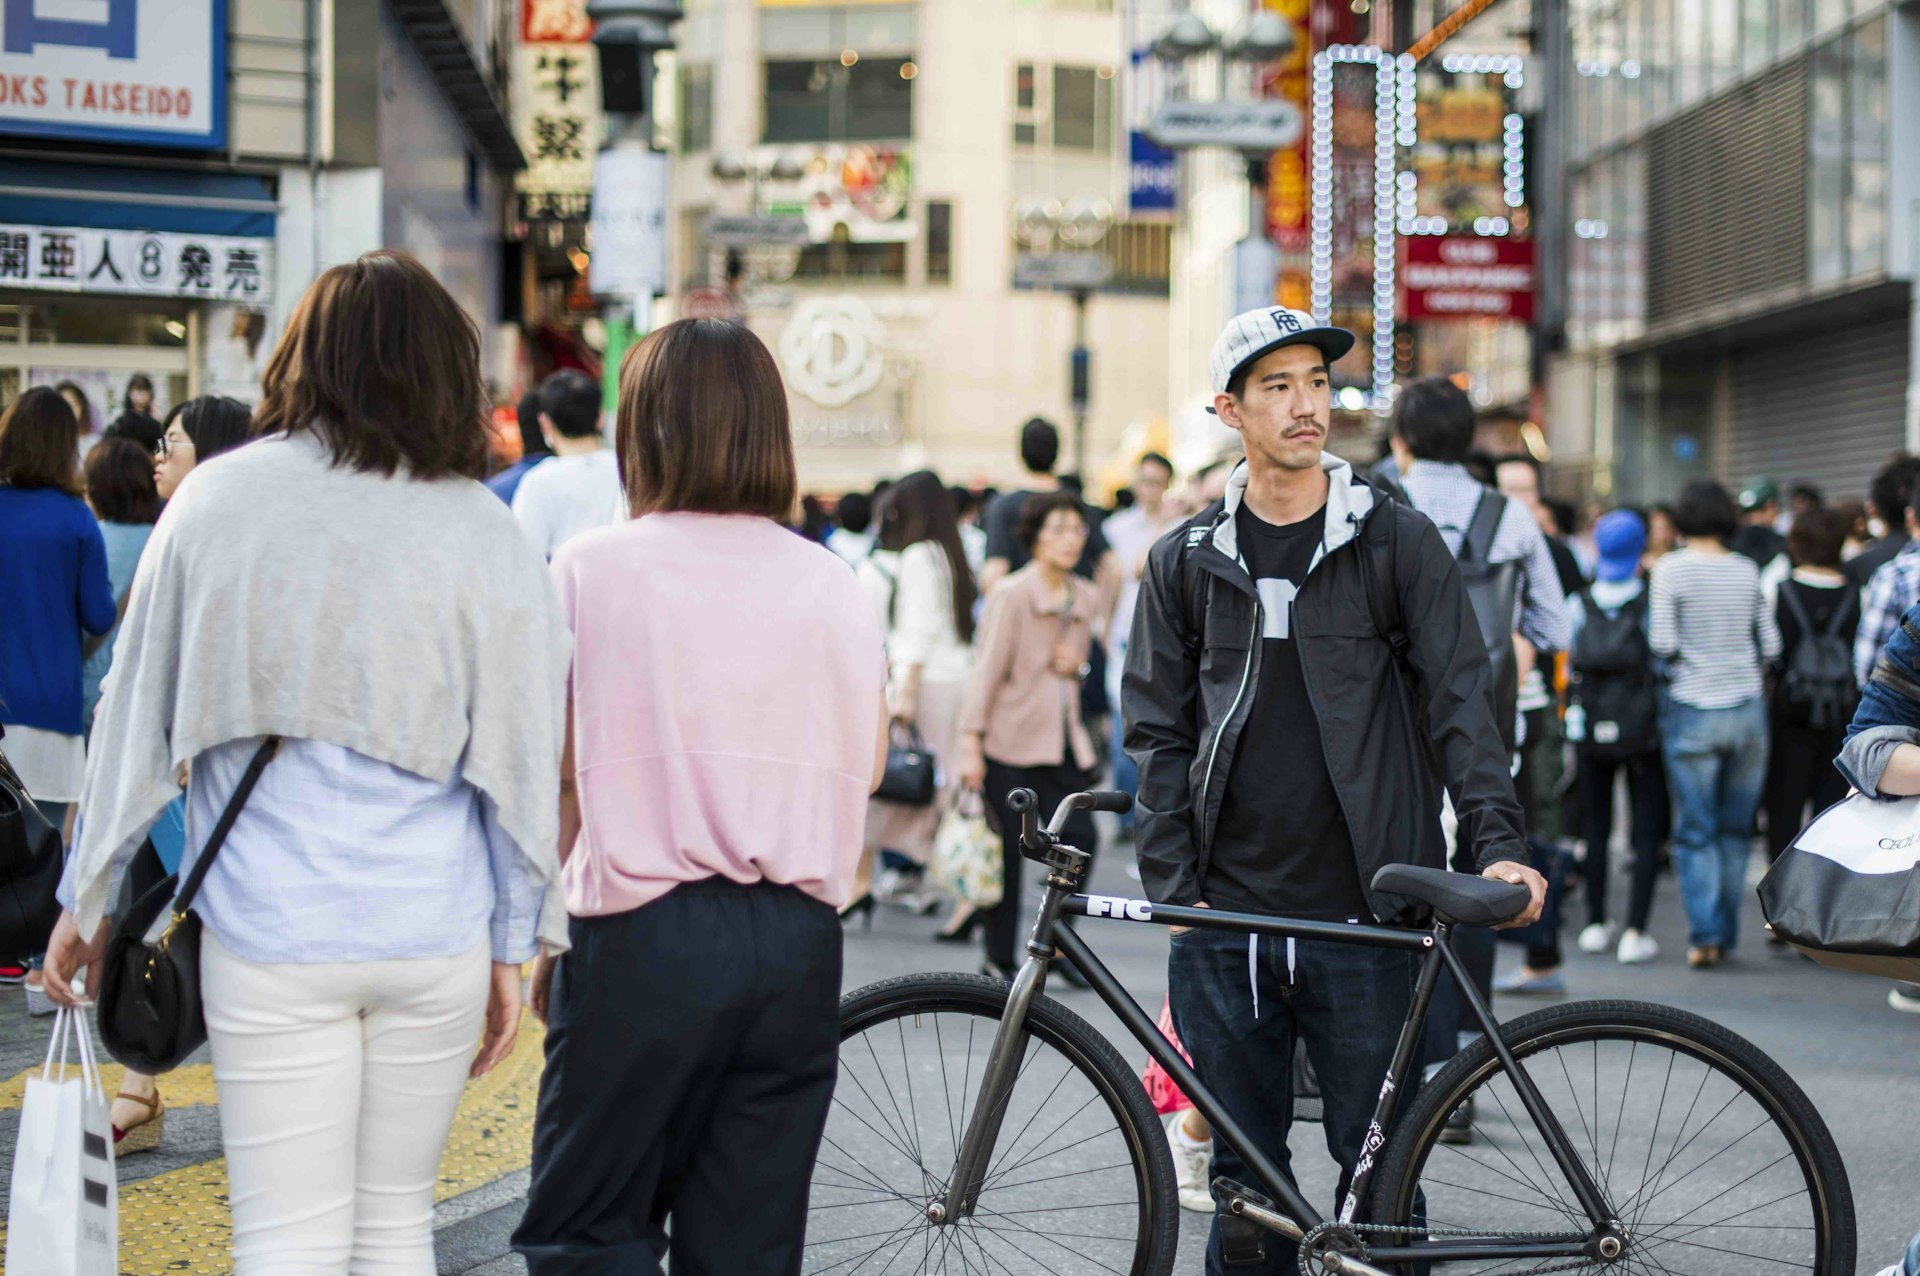 The Japanese cyclists seeing their city differently